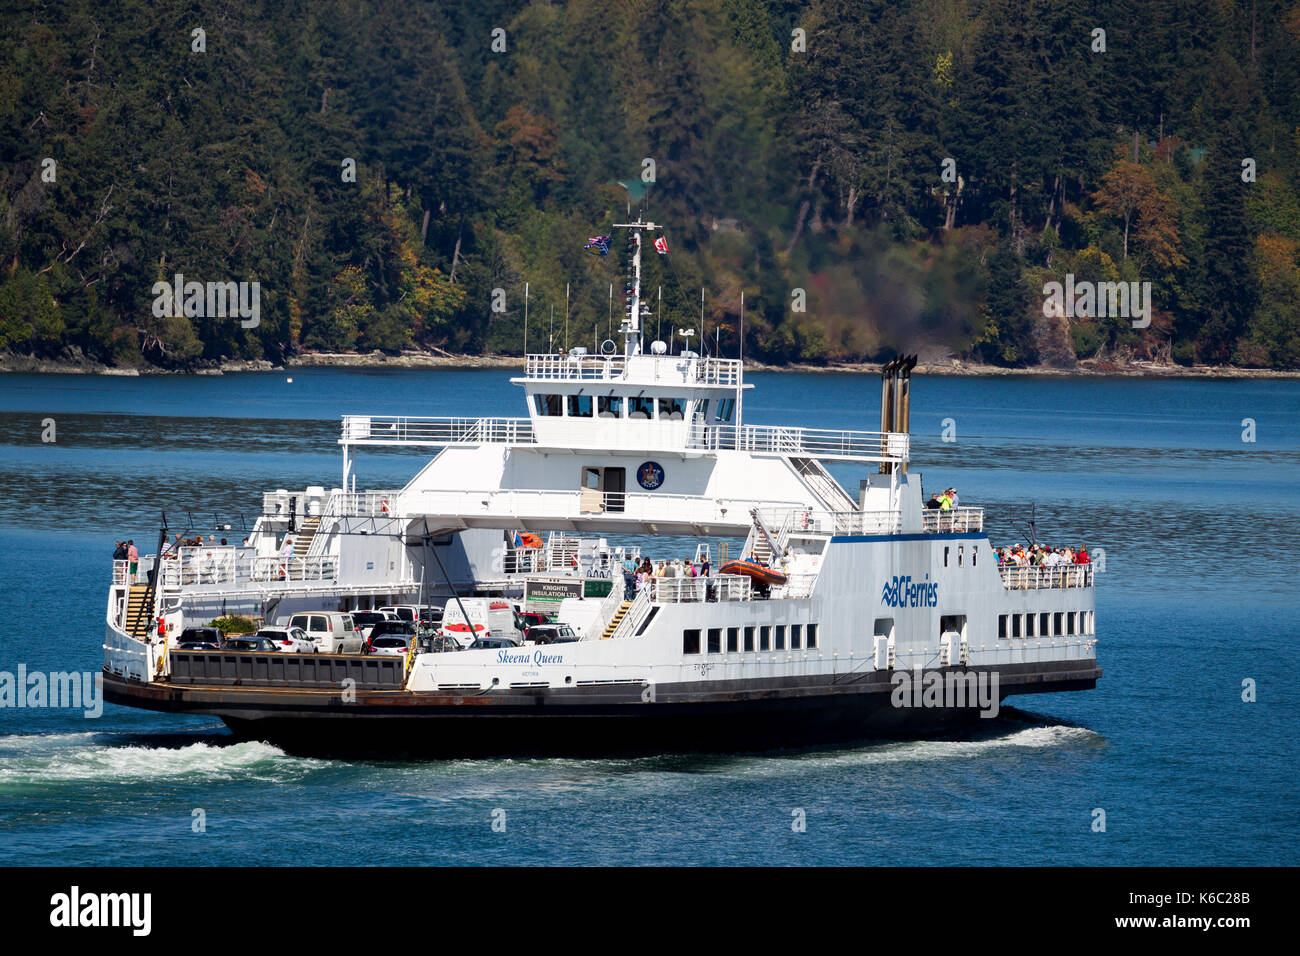 The Skeena Queen, a ferry of BC Ferries, between the Gulf Islands at Vancouver Island, British Columbia, Canada. Stock Photo